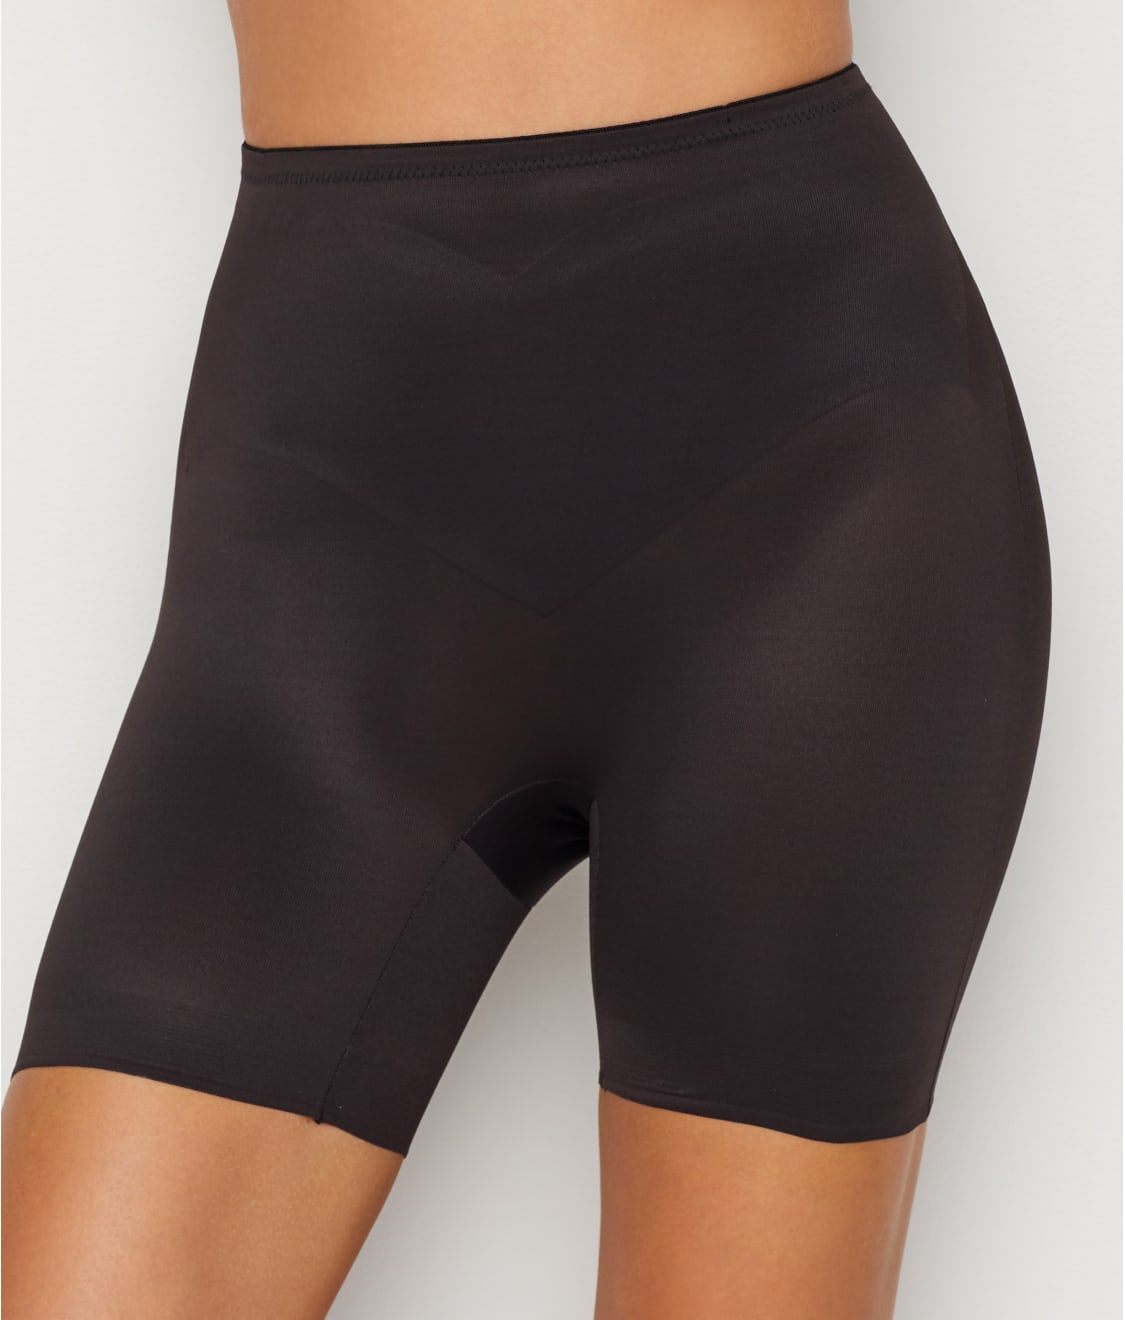 Adjust Perfect Firm Control Shaping Shorts